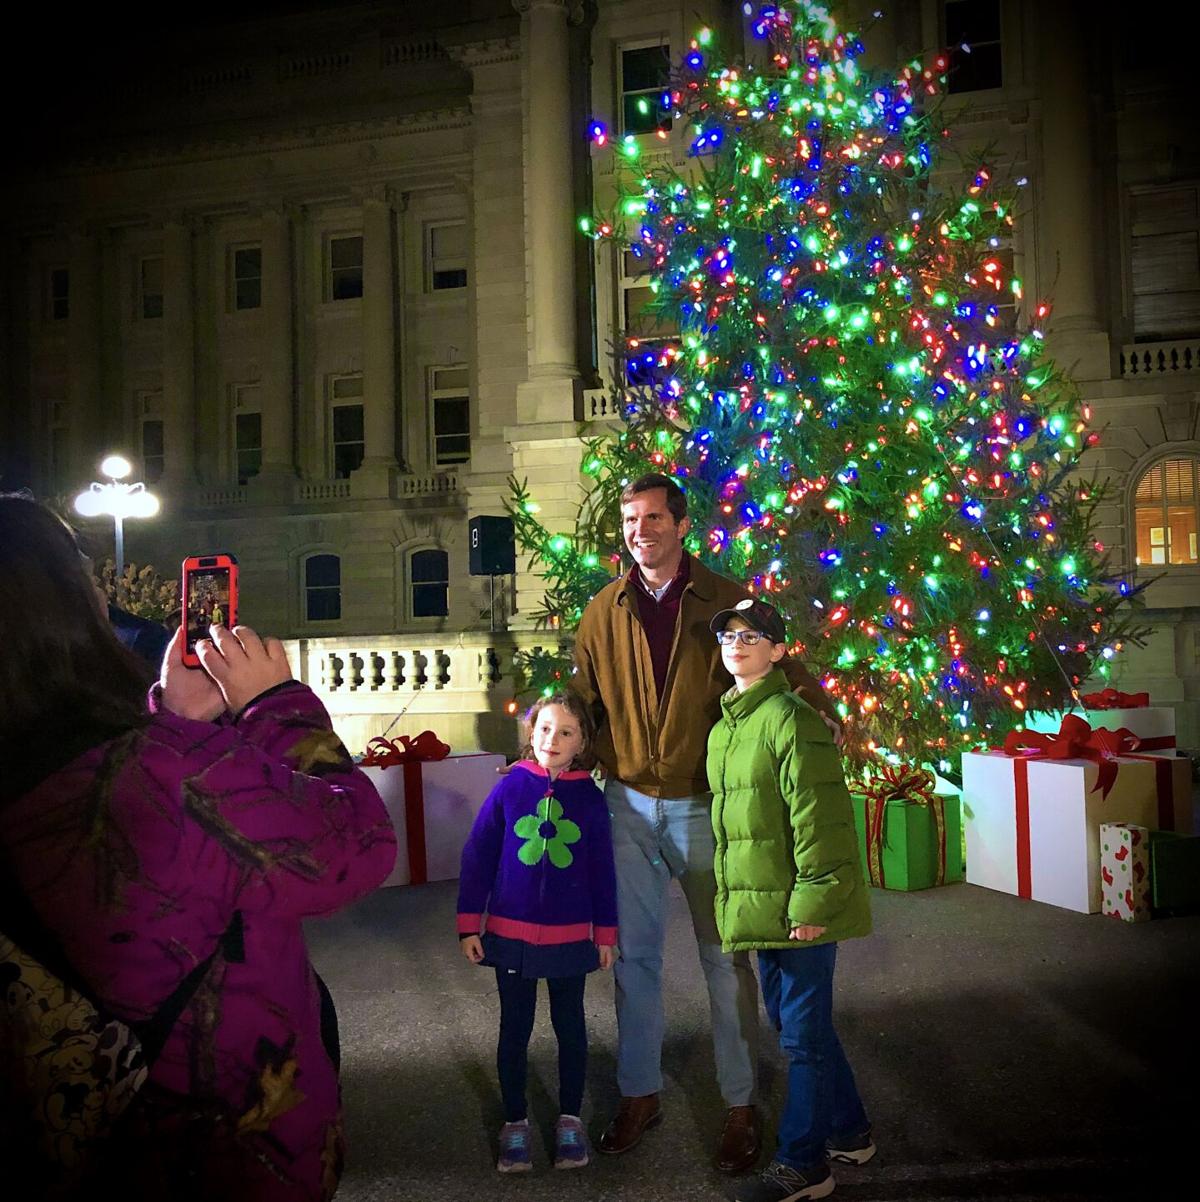 Crowds gather for 73rd Christmas parade, tree lighting at Capitol